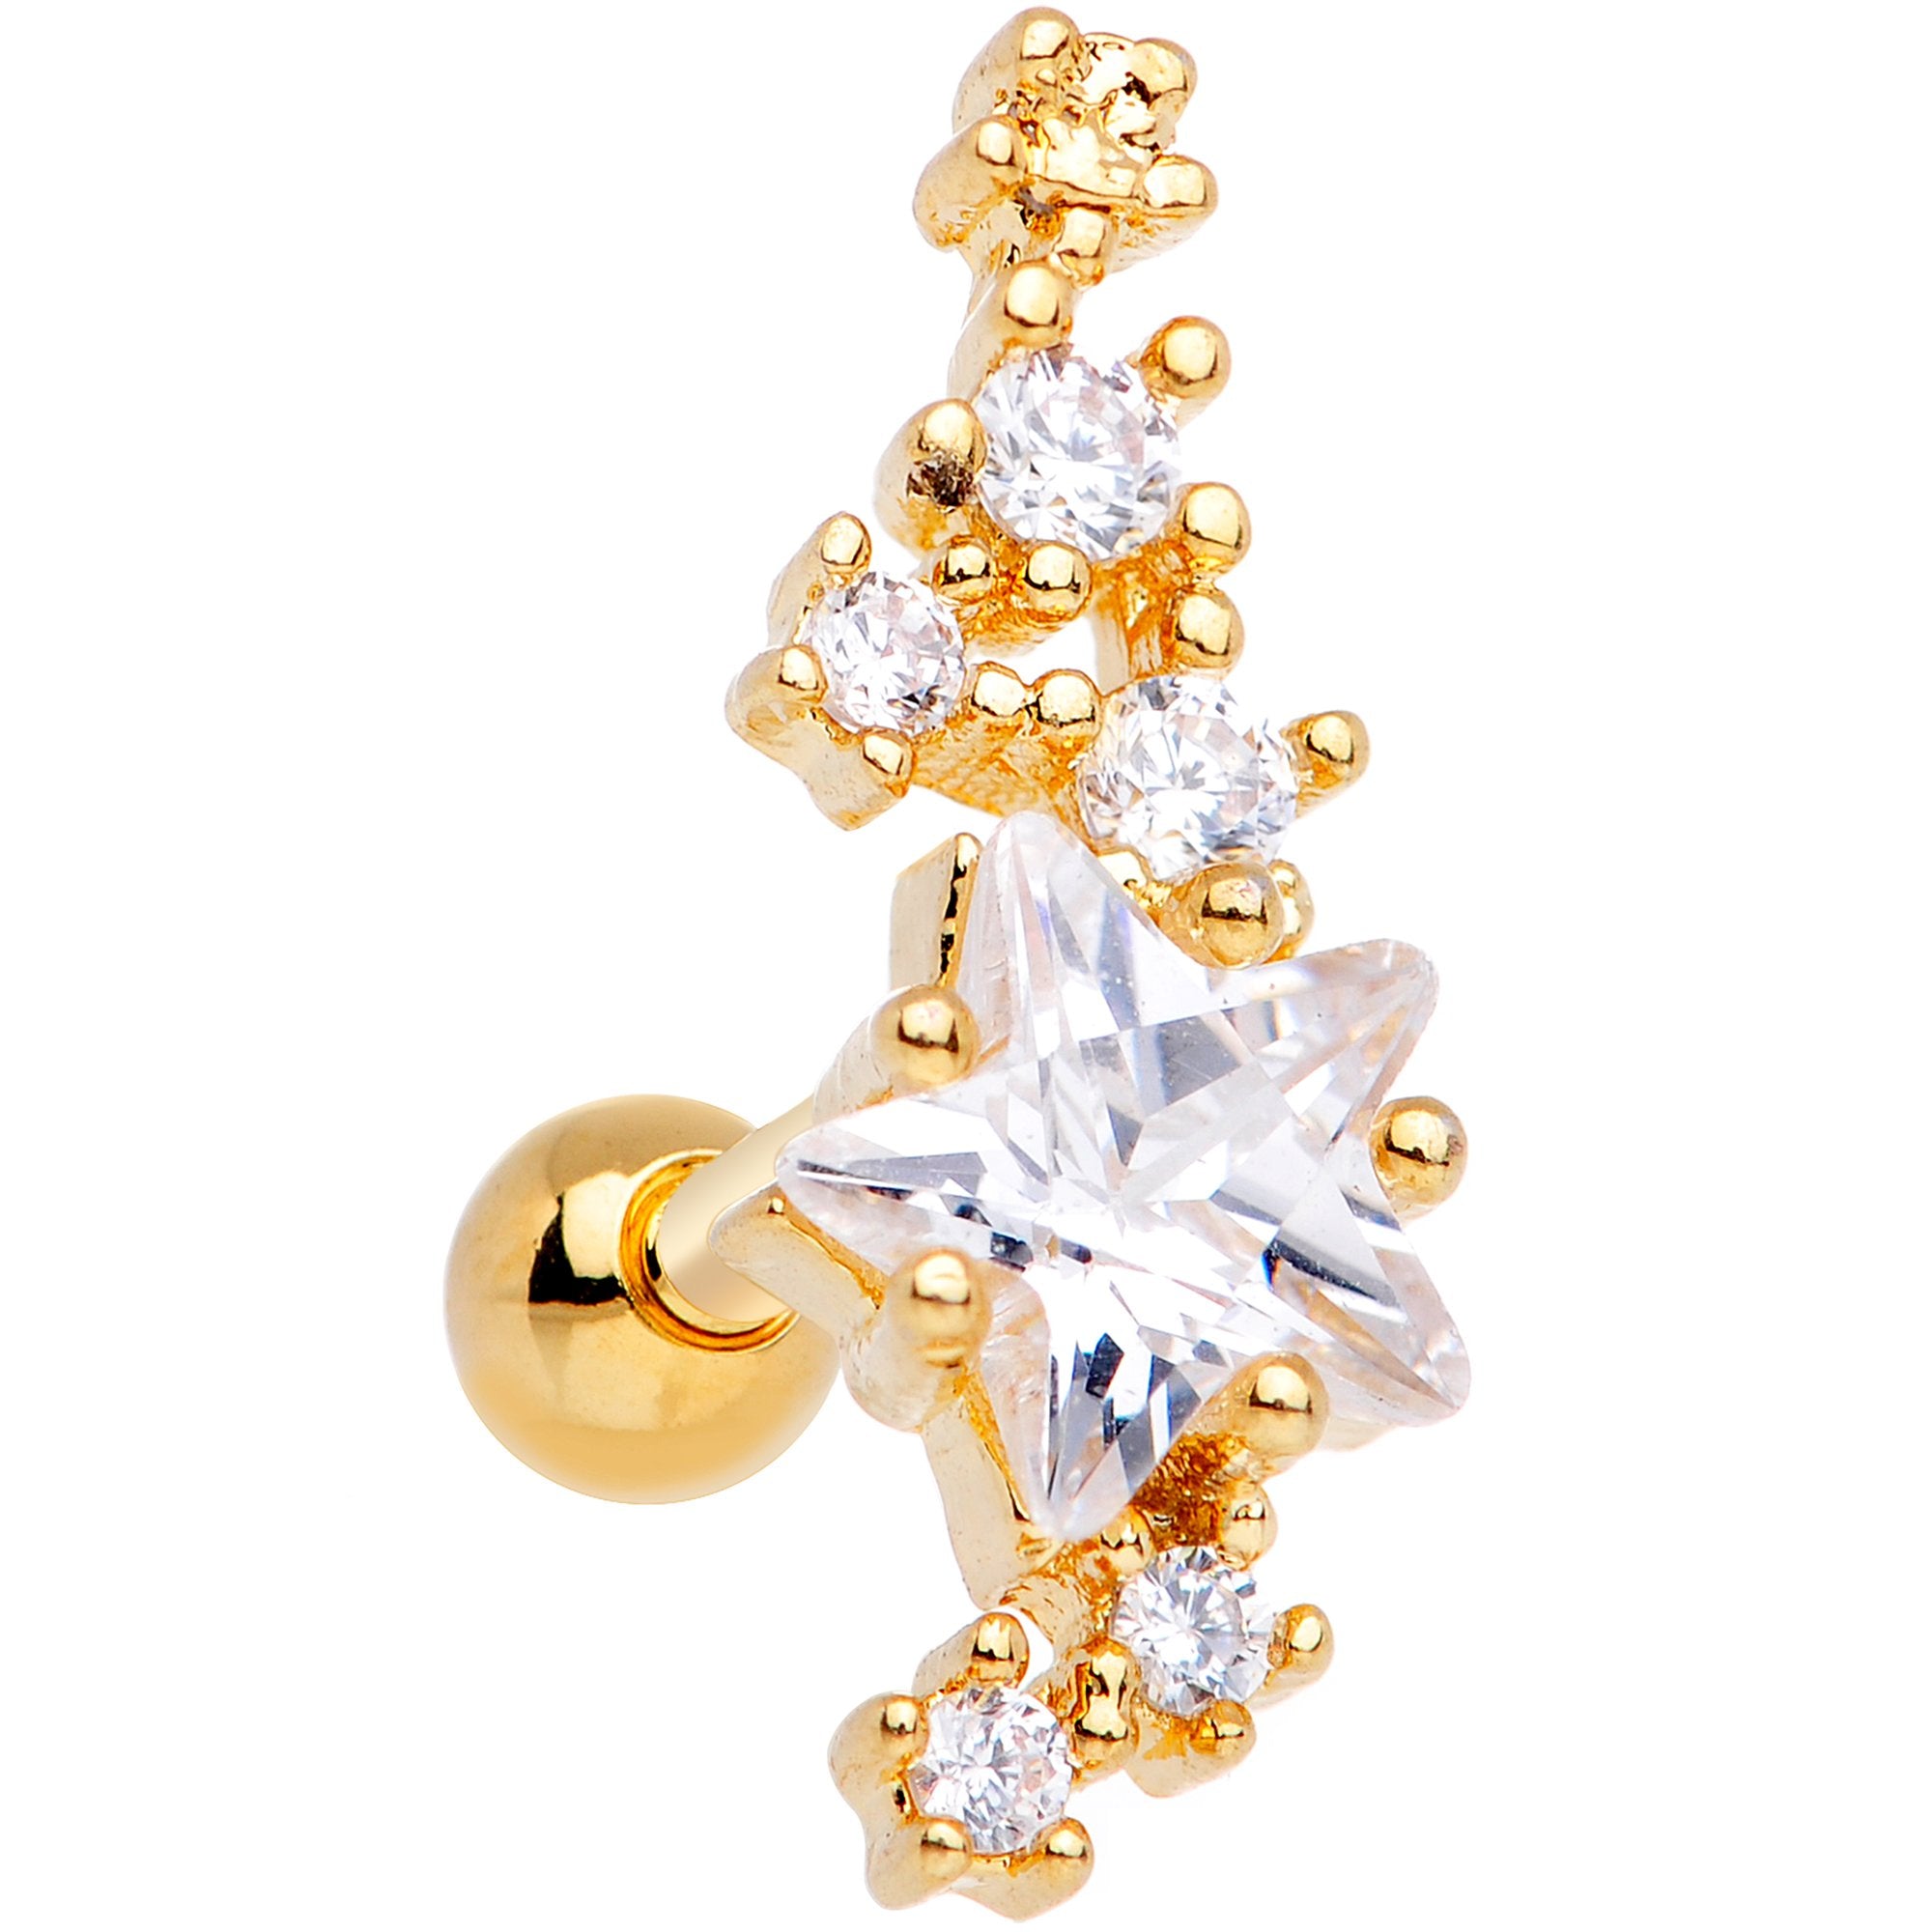 Clear CZ Gem Gold Tone Plated Shooting Star Cartilage Tragus Earring